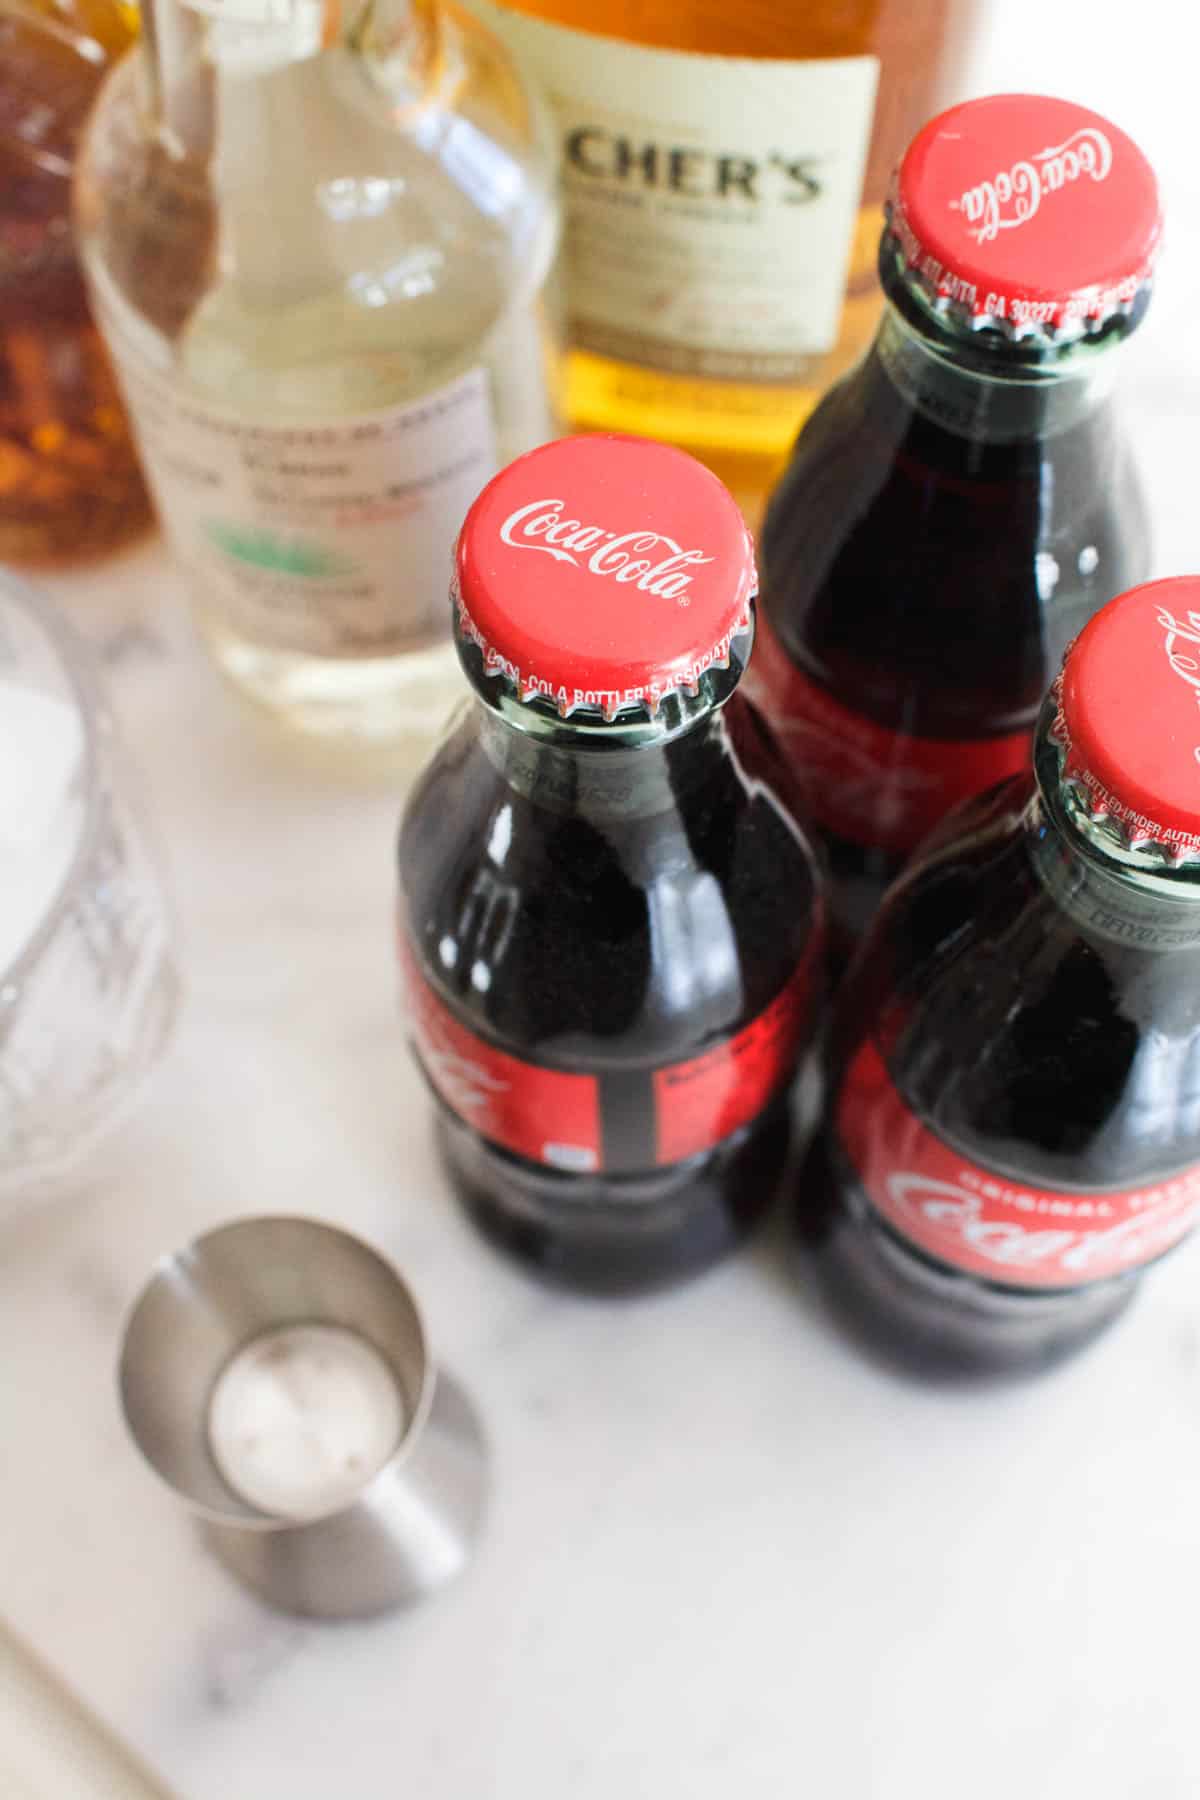 Close up of Coke bottles on a table next to bar tools and bottles.